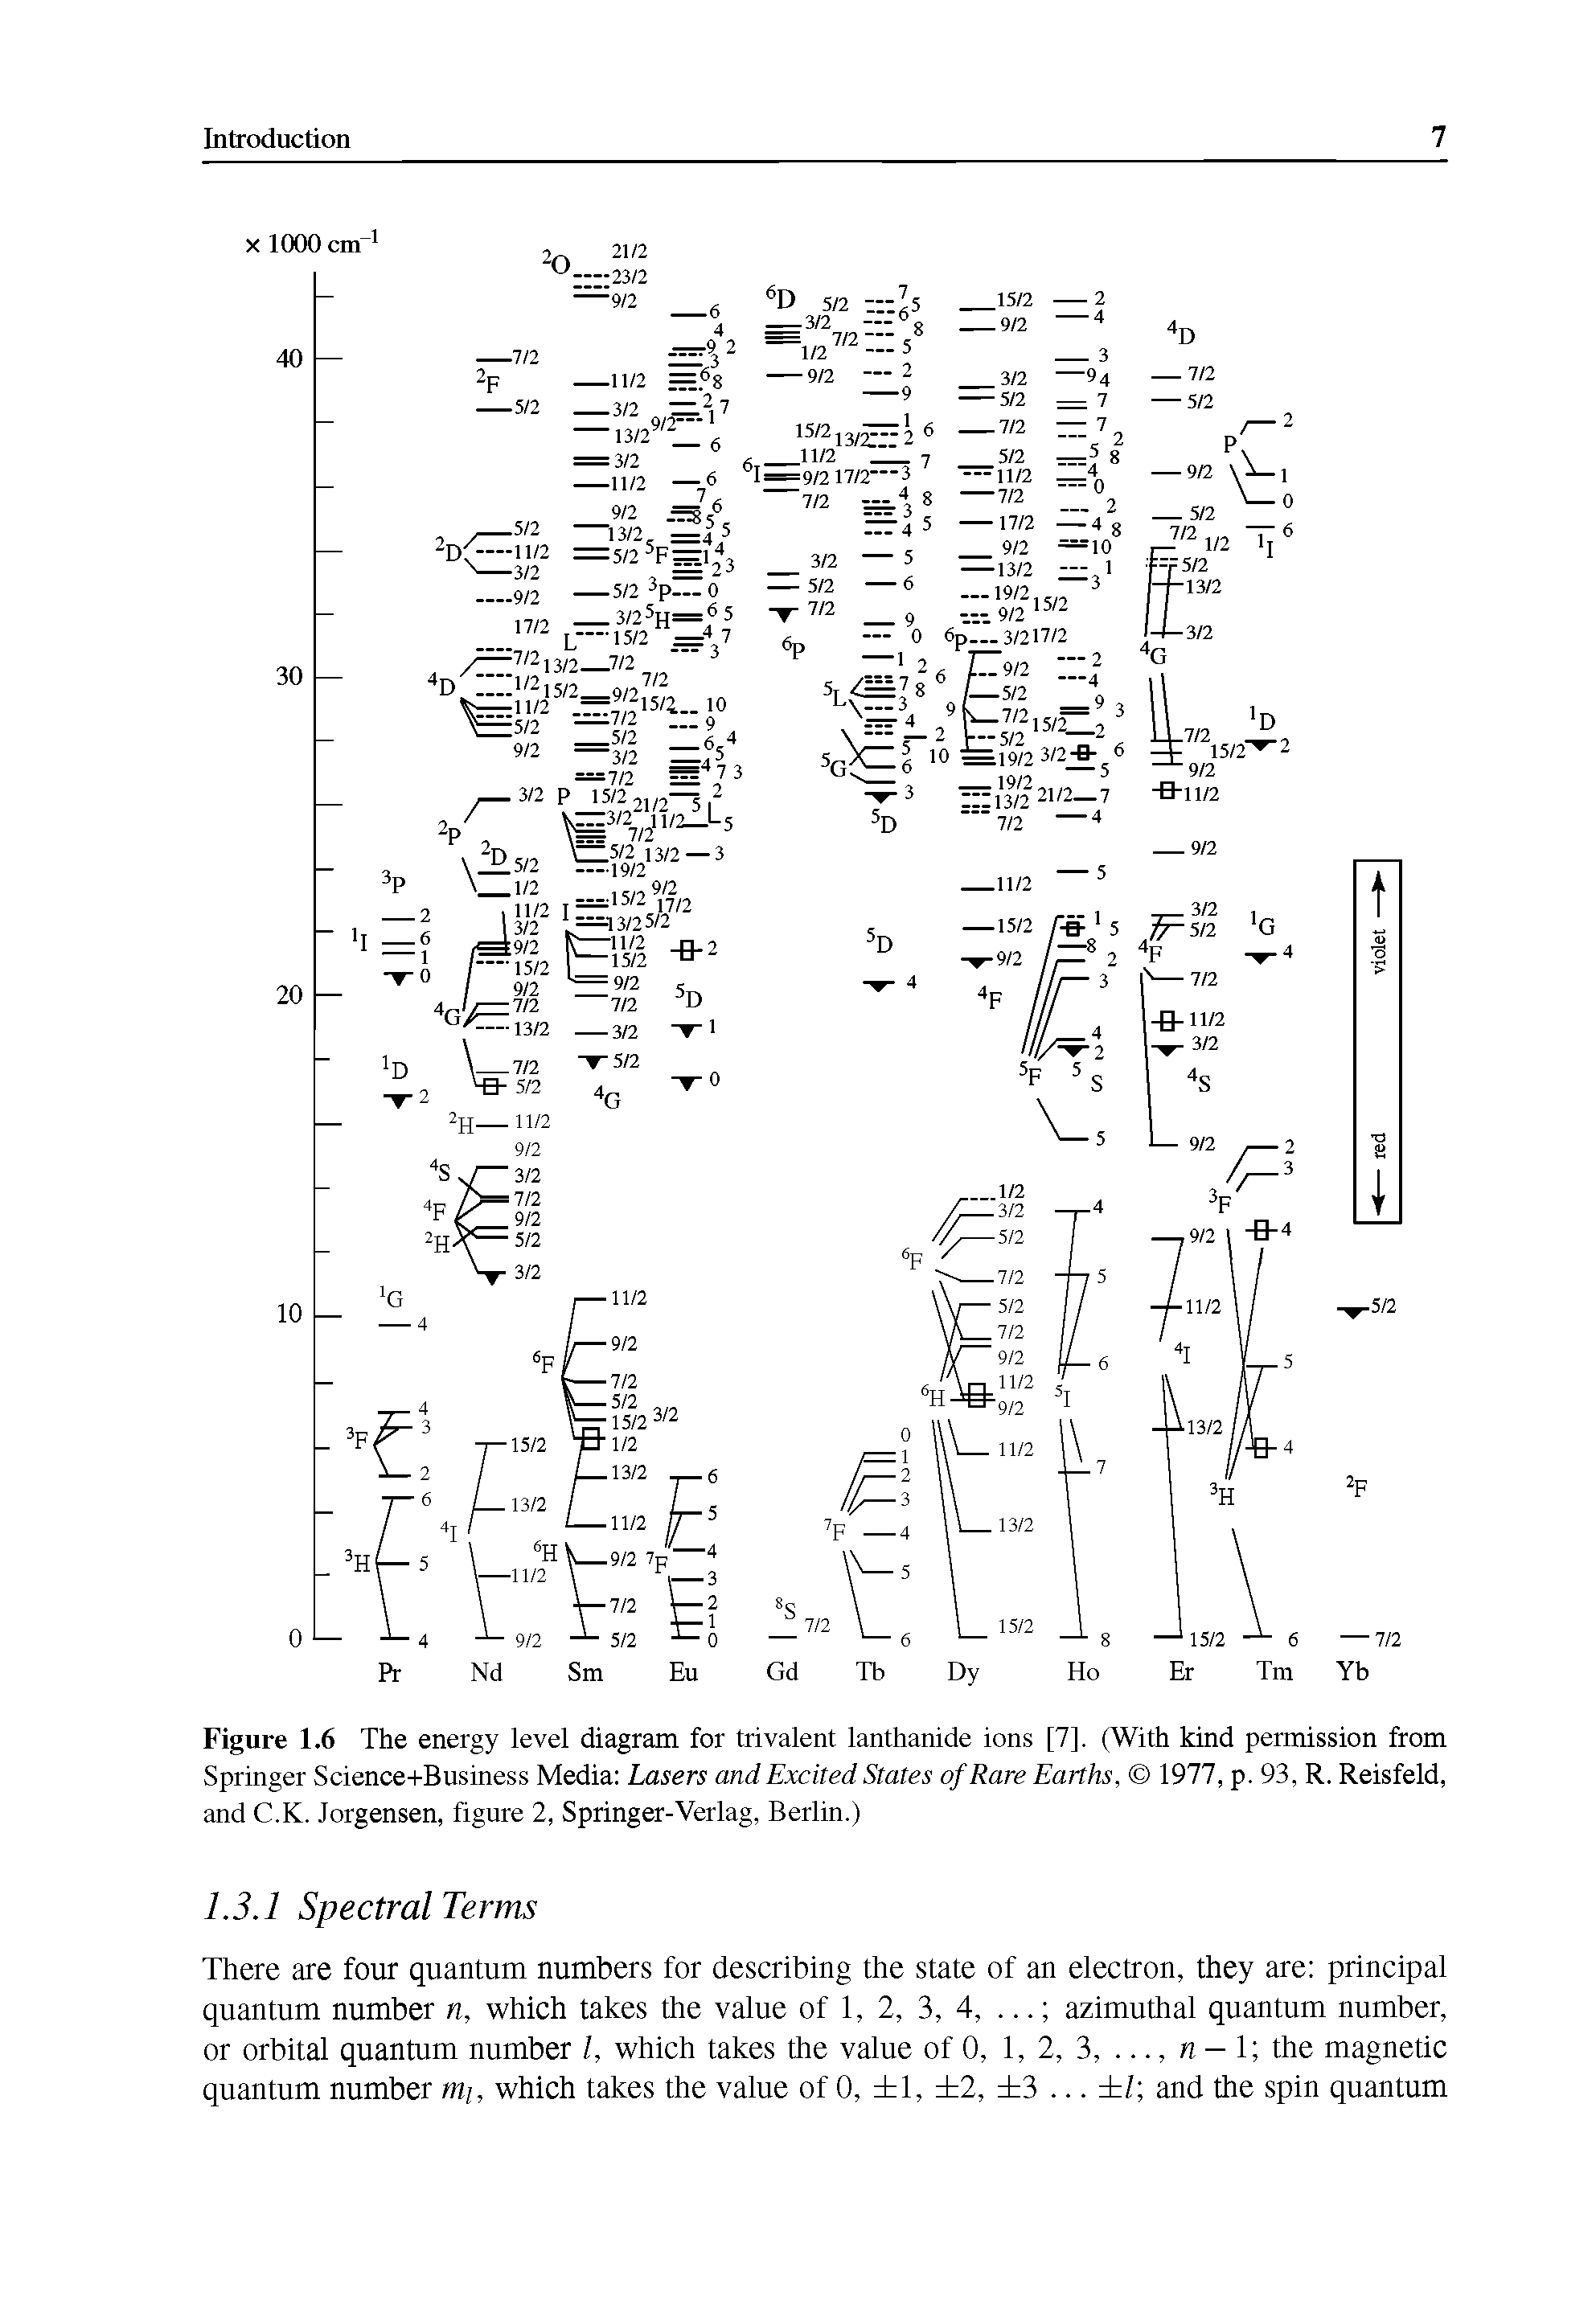 Figure 1.6 The energy level diagram for trivalent lanthanide ions [7]. (With kind permission from Springer Science+Business Media Lasers and Excited States of Rare Earths, 1977, p. 93, R. Reisfeld, and C.K. Jorgensen, figure 2, Springer-Verlag, Berlin.)...